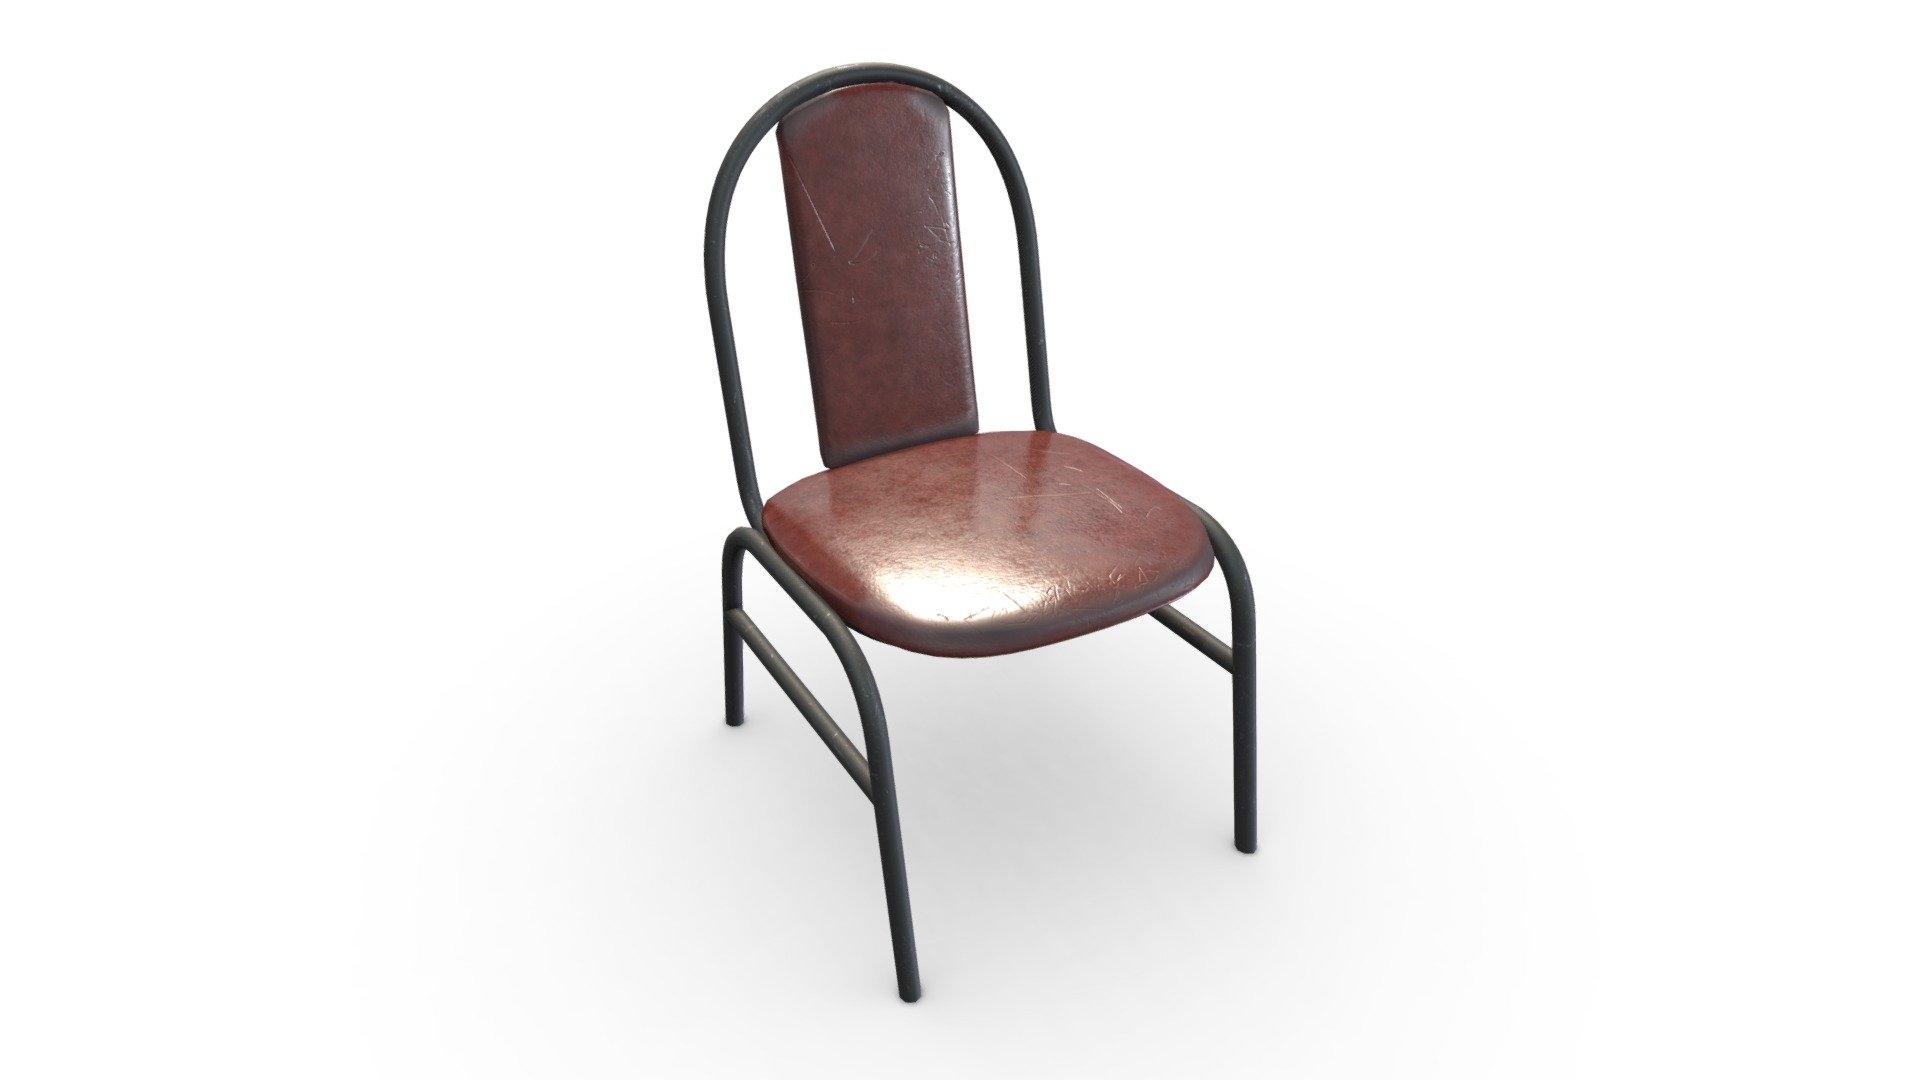 A club chair referenced from chairs found in The Comedy Store 3d model